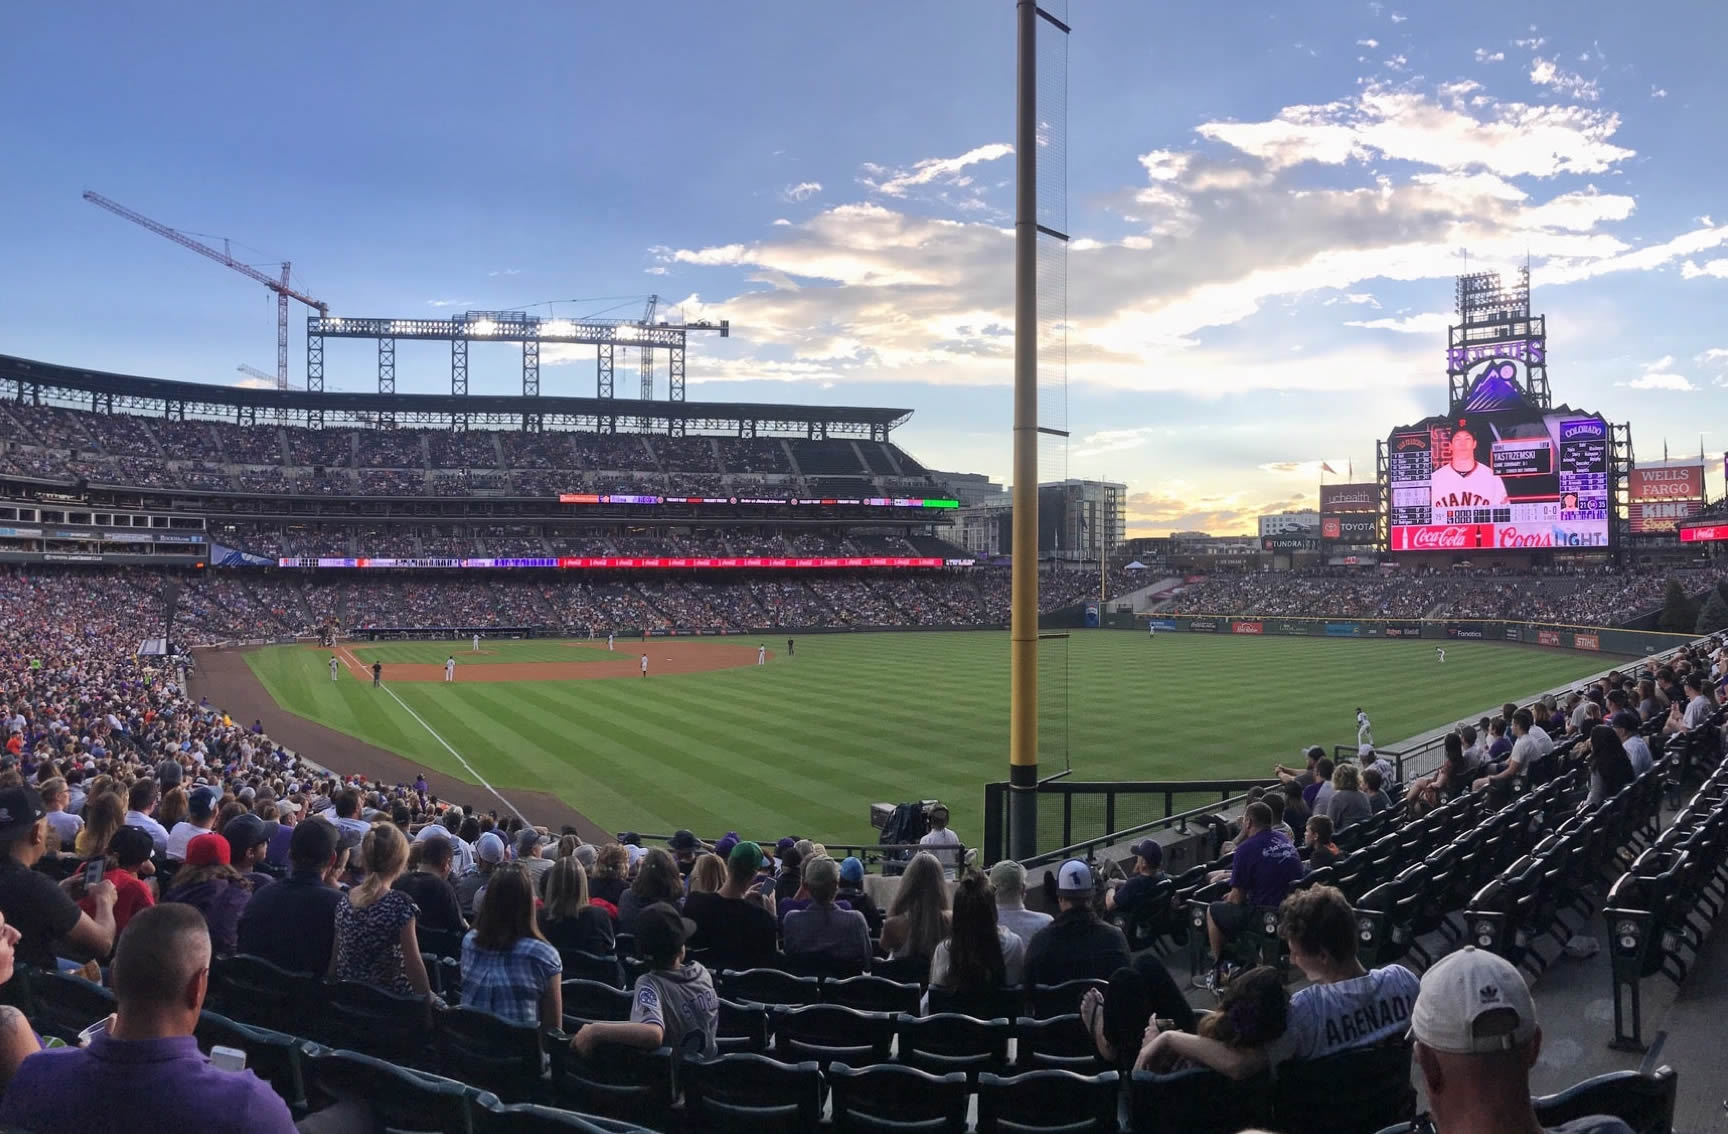 section 110, row 32 seat view  - coors field